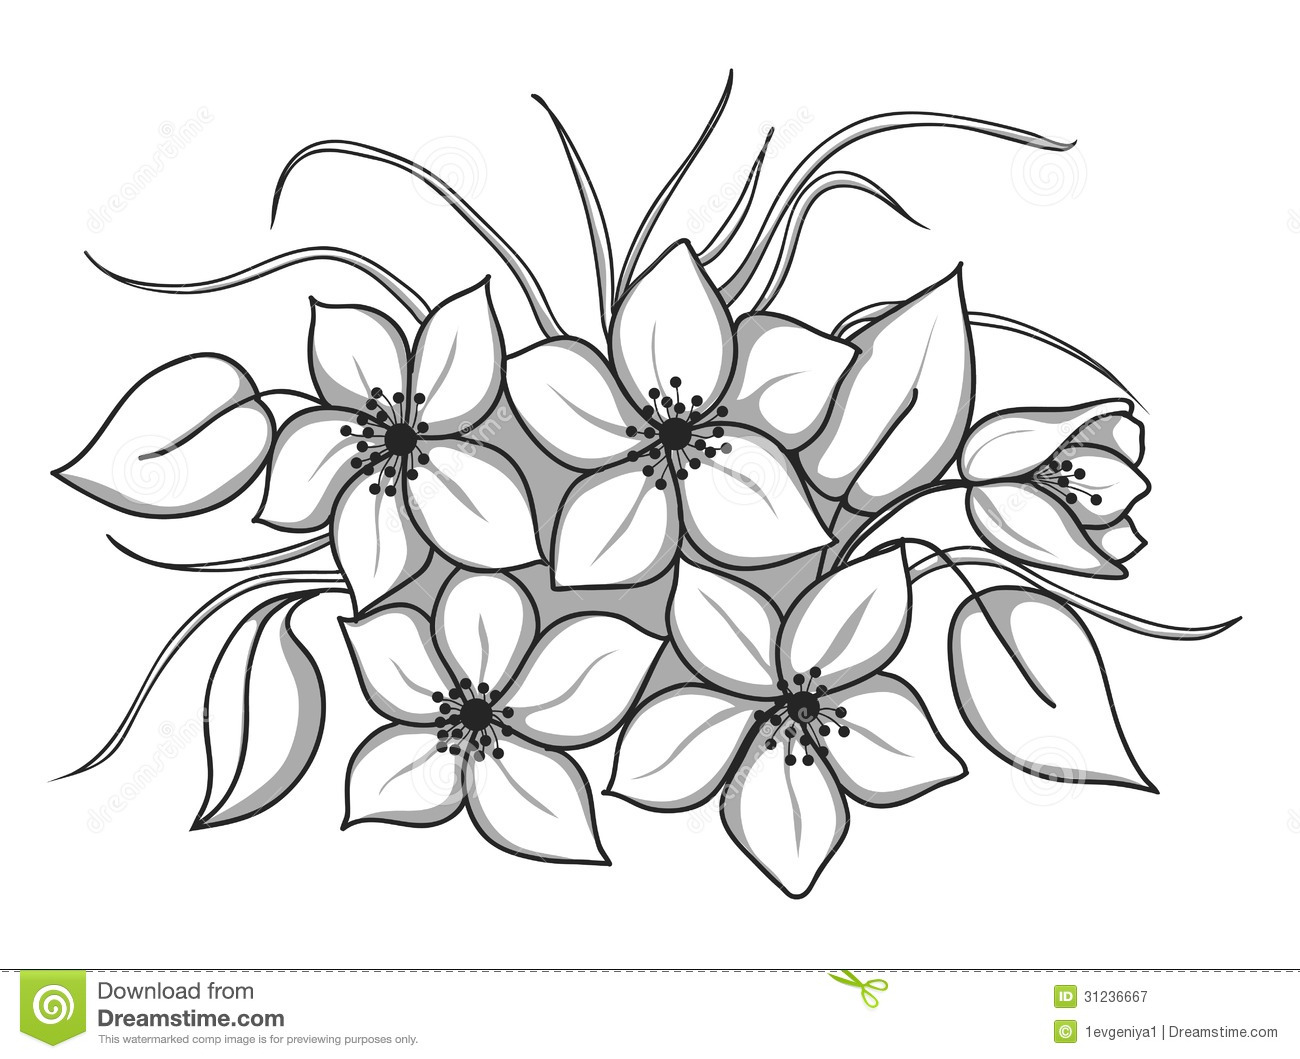 Bouquet Of Flowers Line Drawing at